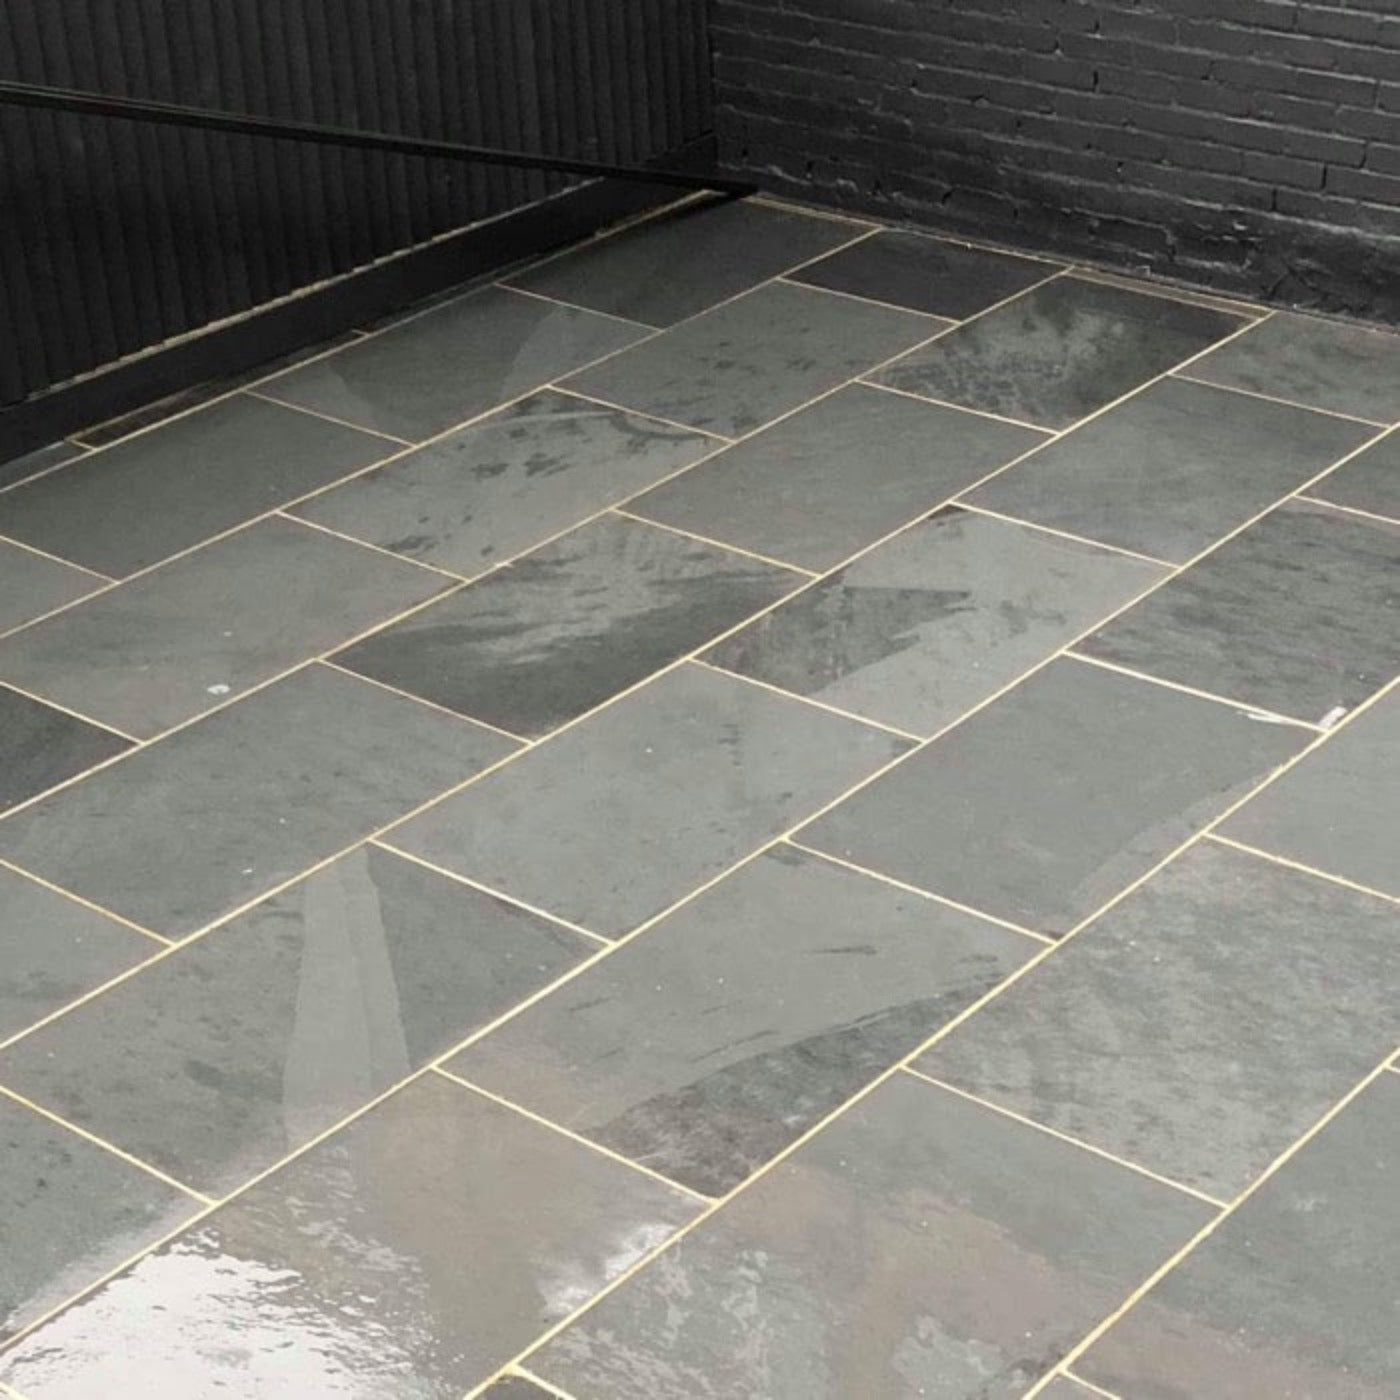 Black Slate Paving Slabs | 900 x 600 x 20 mm | As low as £34.97/m2 | Delivered